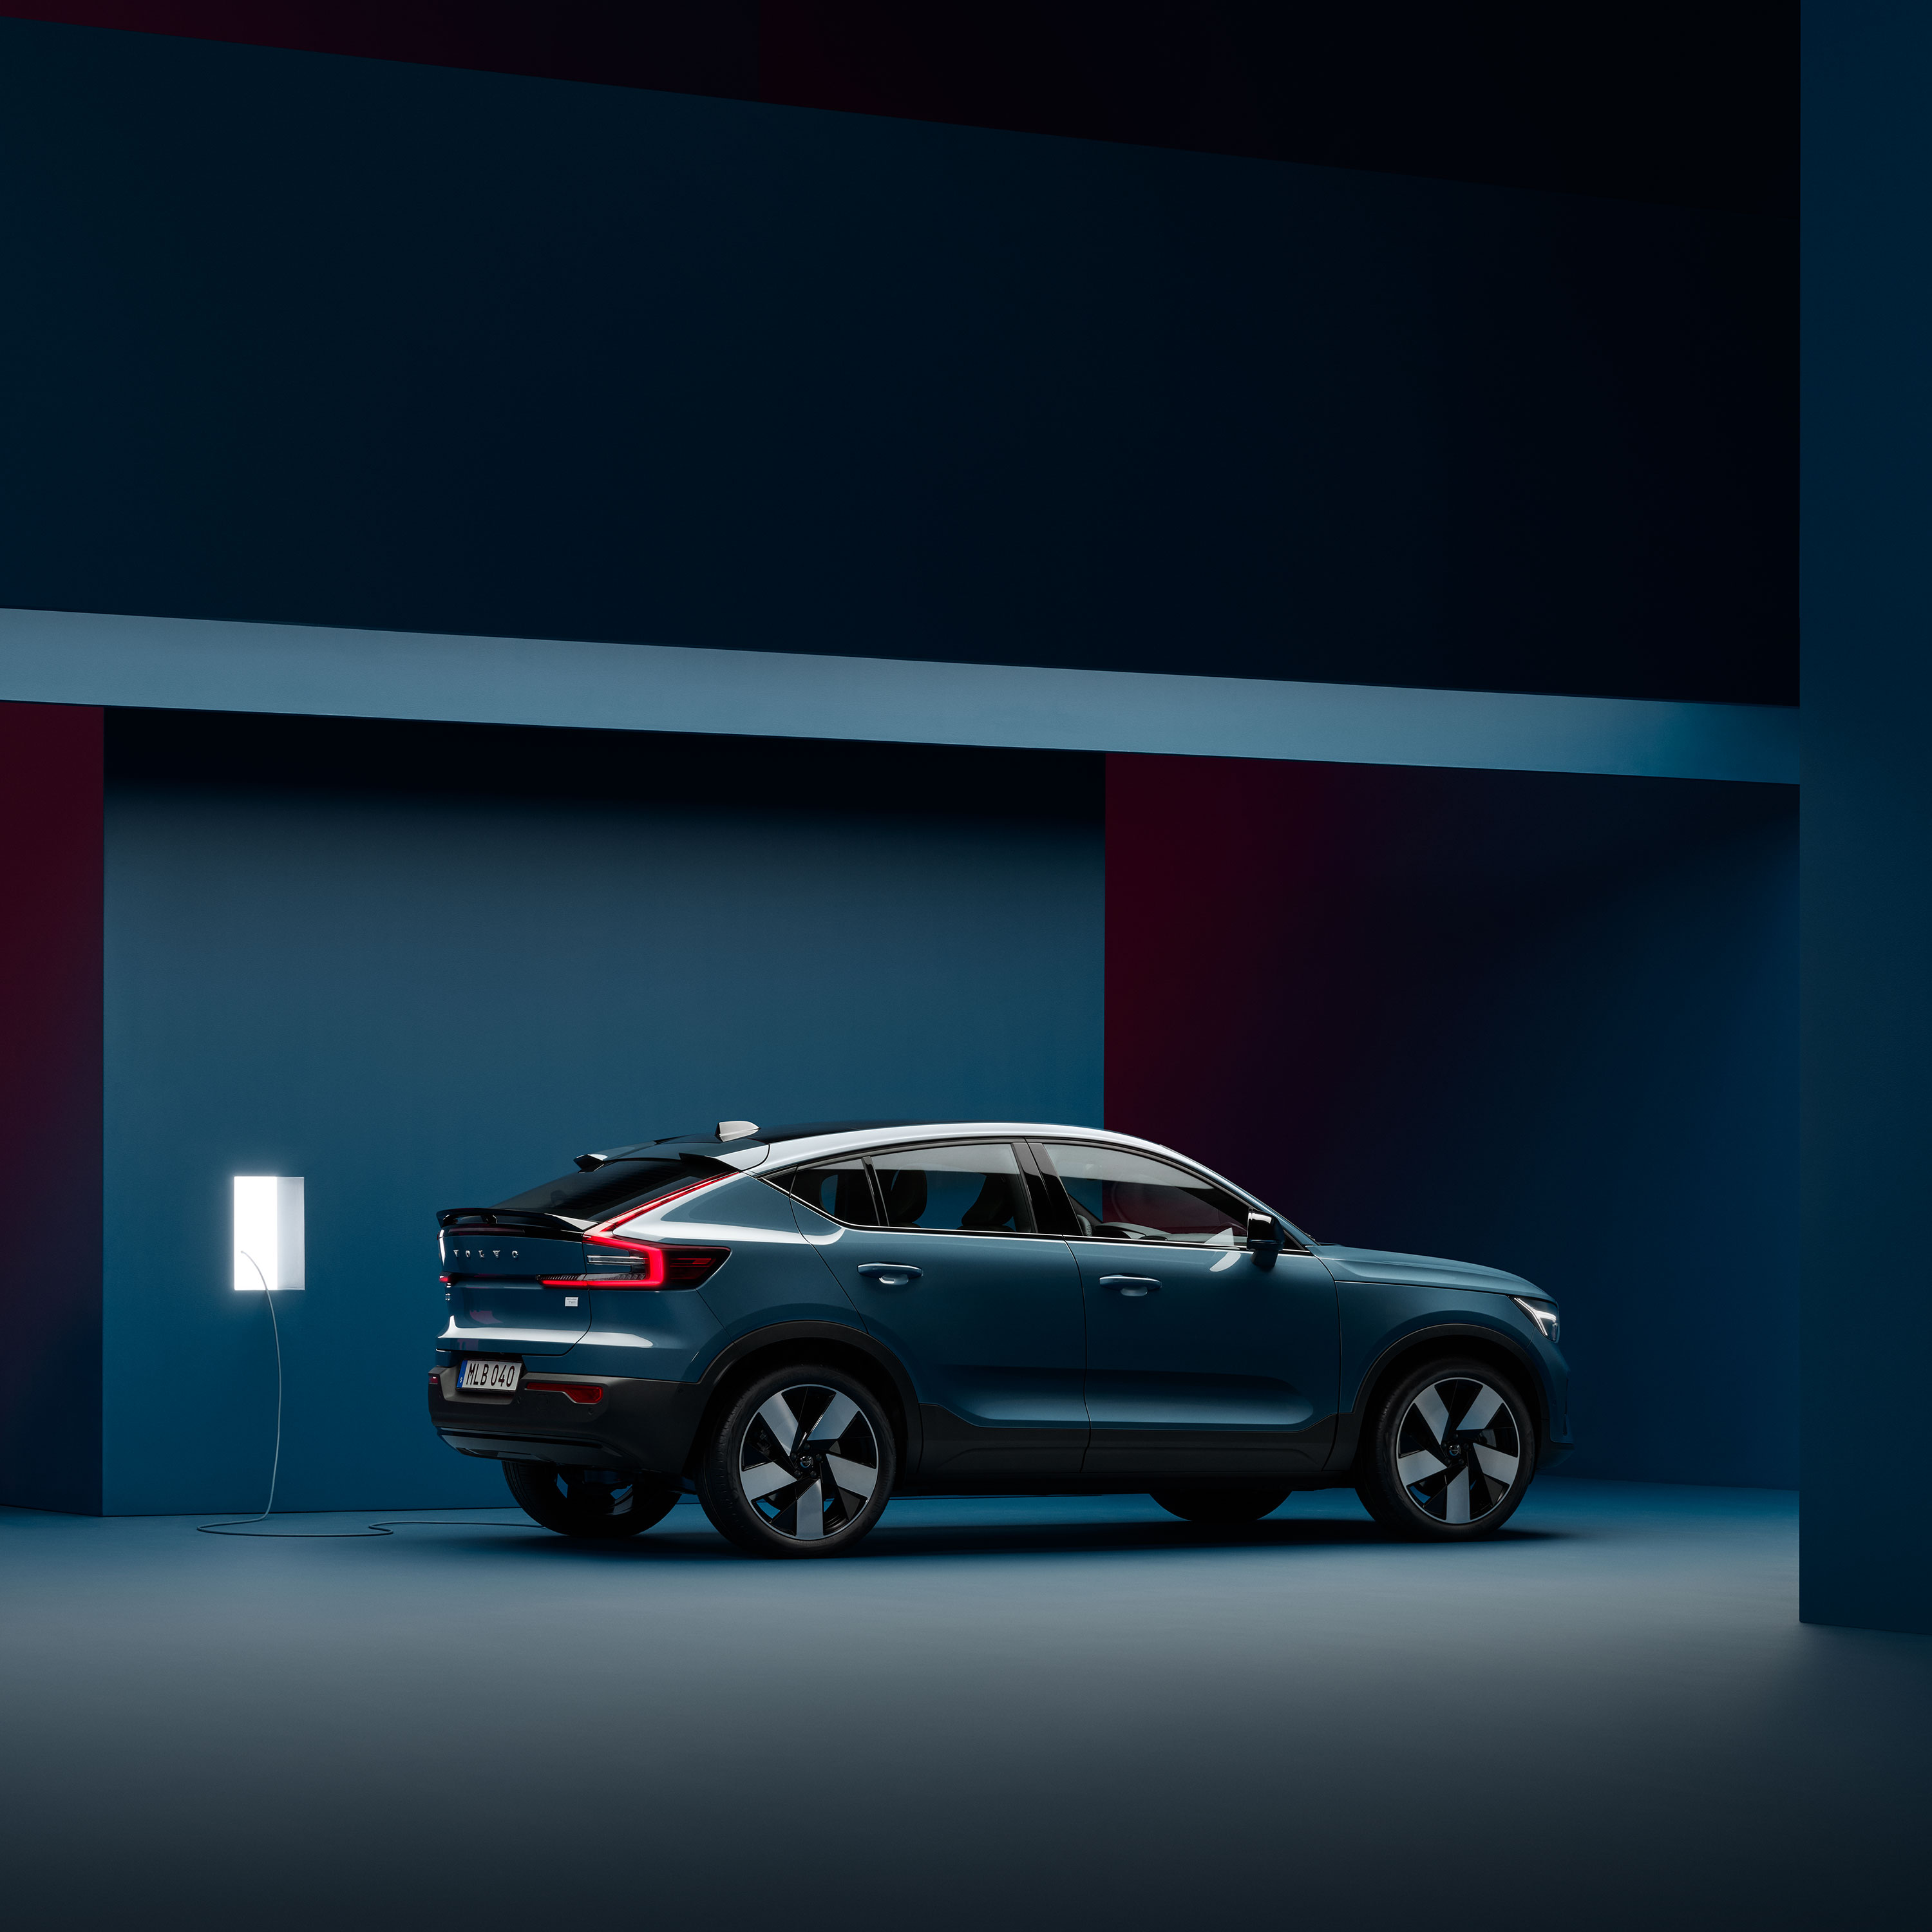 Slimmed crossover exterior silhouette of the Volvo C40 Recharge.